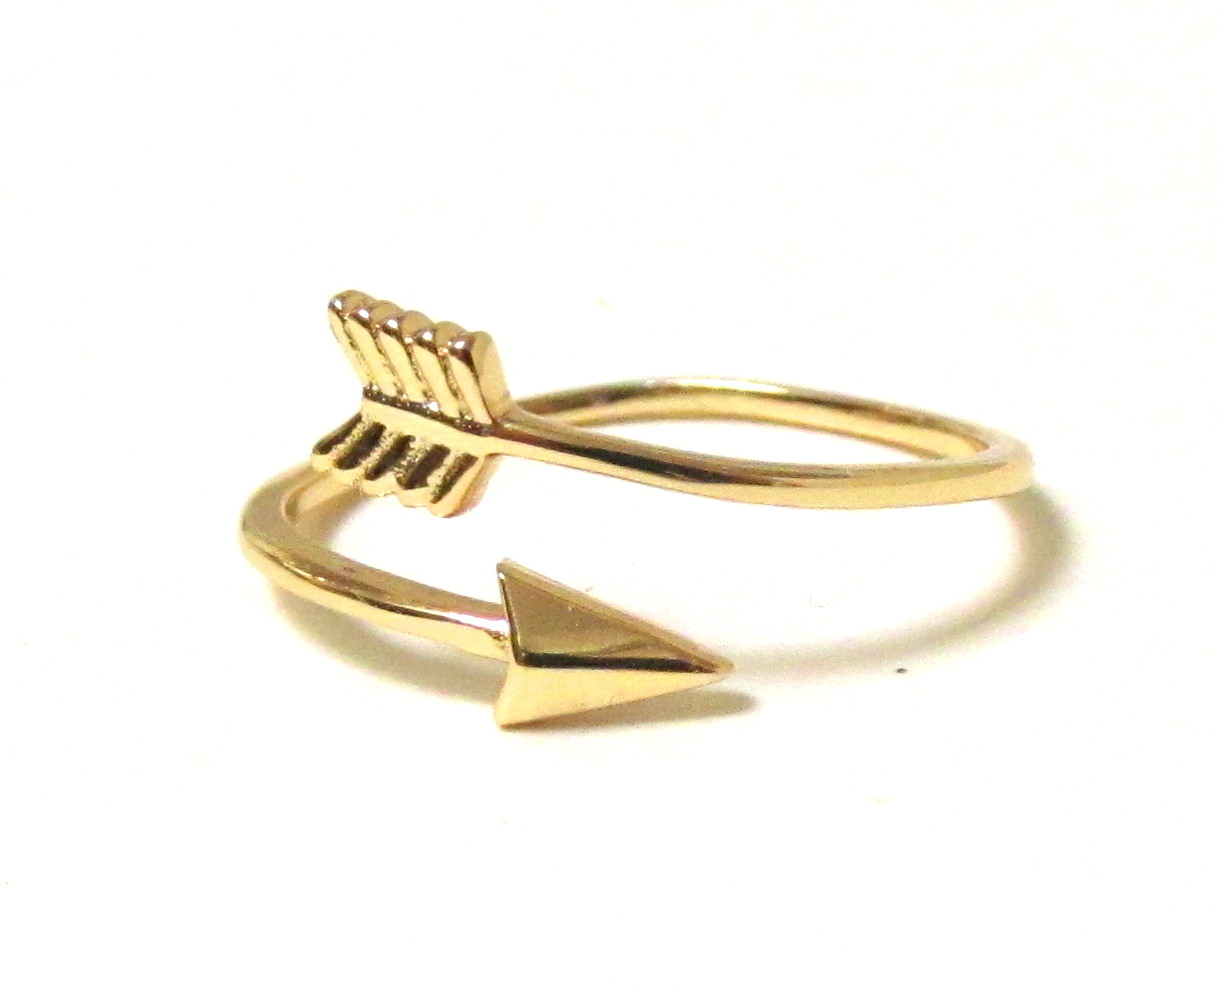 Arrow Ring - 14 Kt Gold Over Sterling Silver Arrow Ring In Size 5